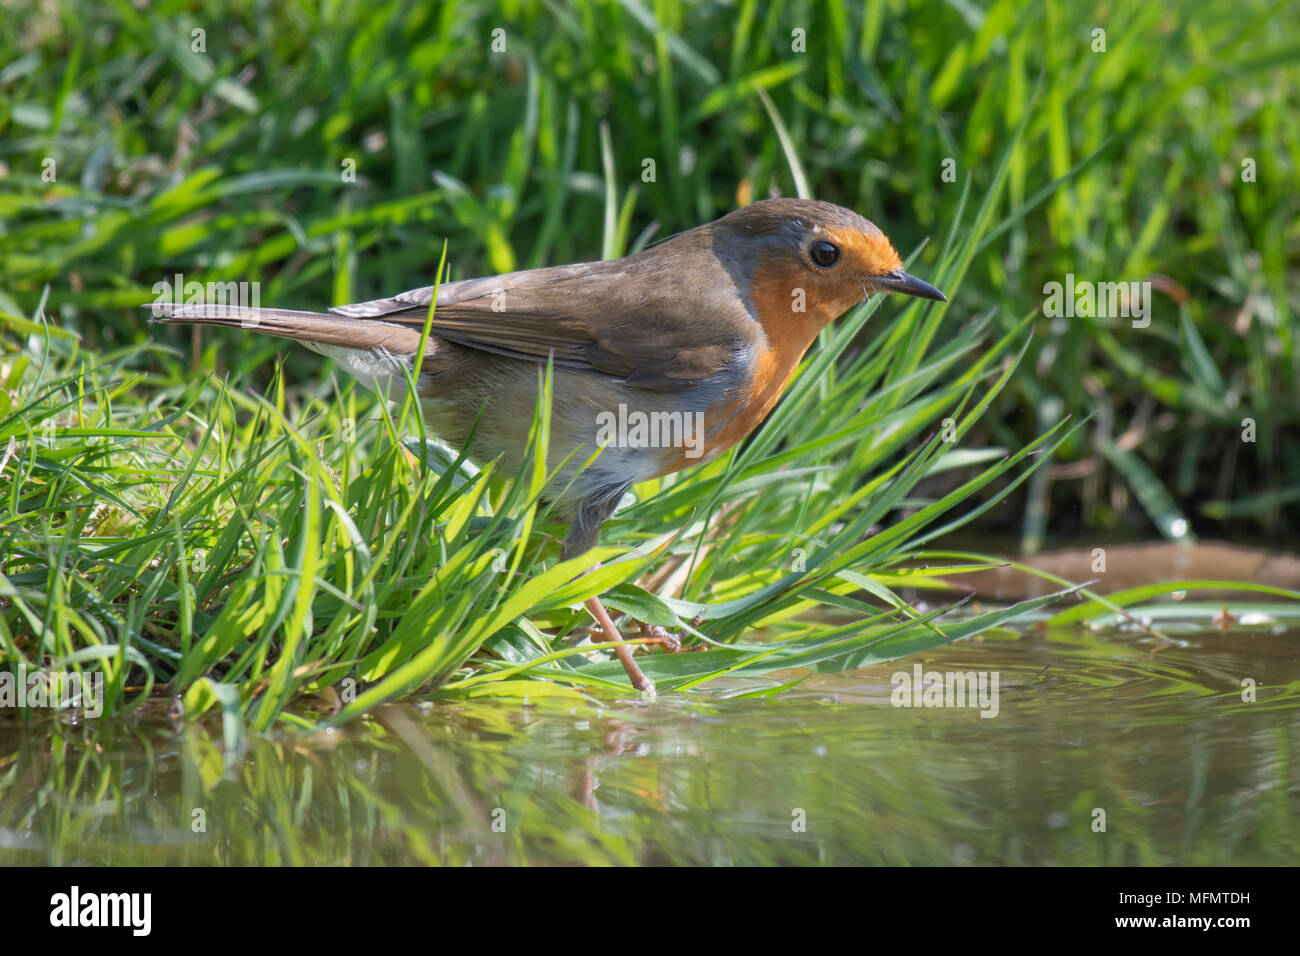 A robin standing on the grass at the edge of a pond pool staring intently into the water surrounded by grass Stock Photo